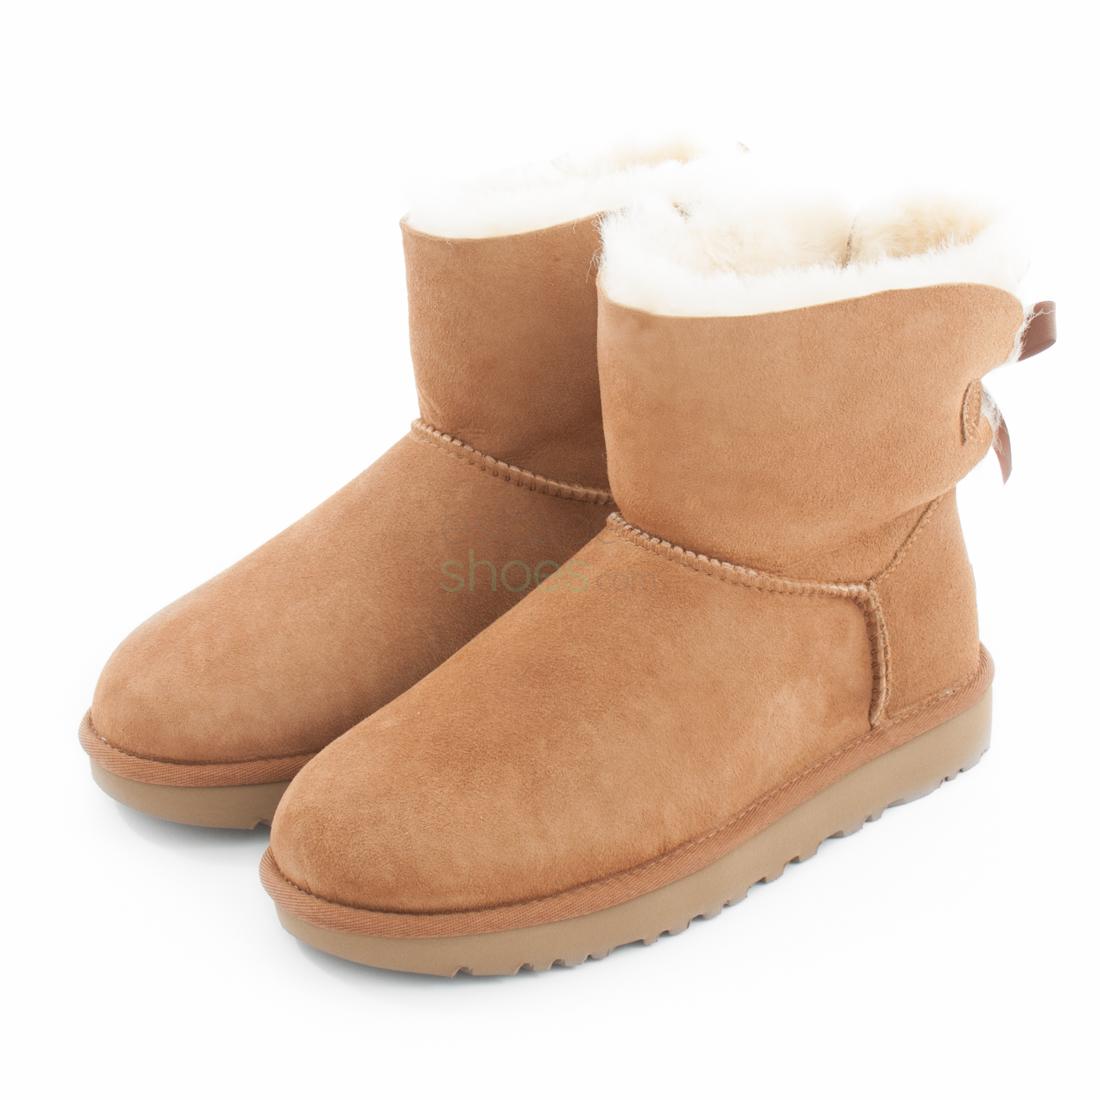 Ugg Classic Mini Bailey Bow Boots (Water Resistant)